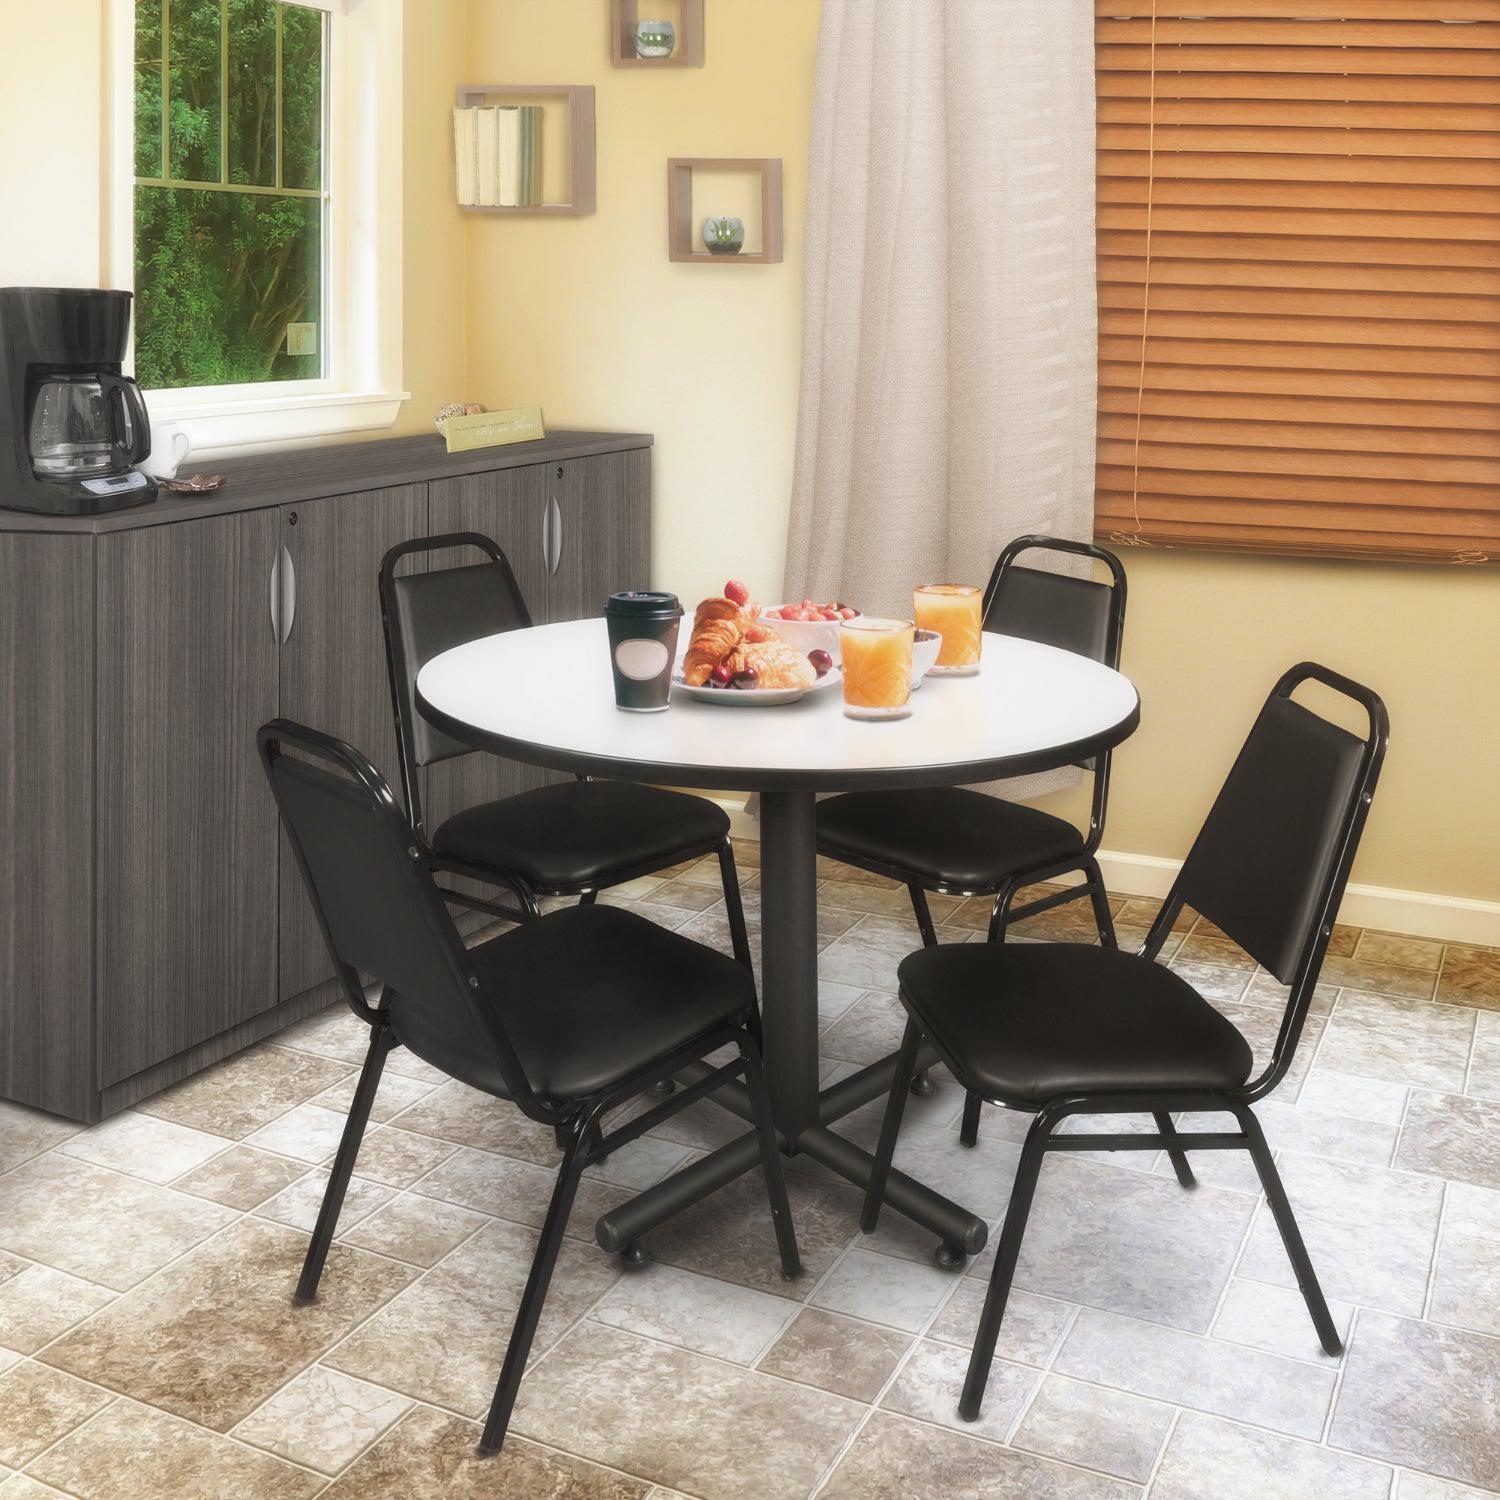 Kobe Round Breakroom Table and Chair Package, Kobe 48" Round X-Base Breakroom Table with 4 Restaurant Stack Chairs